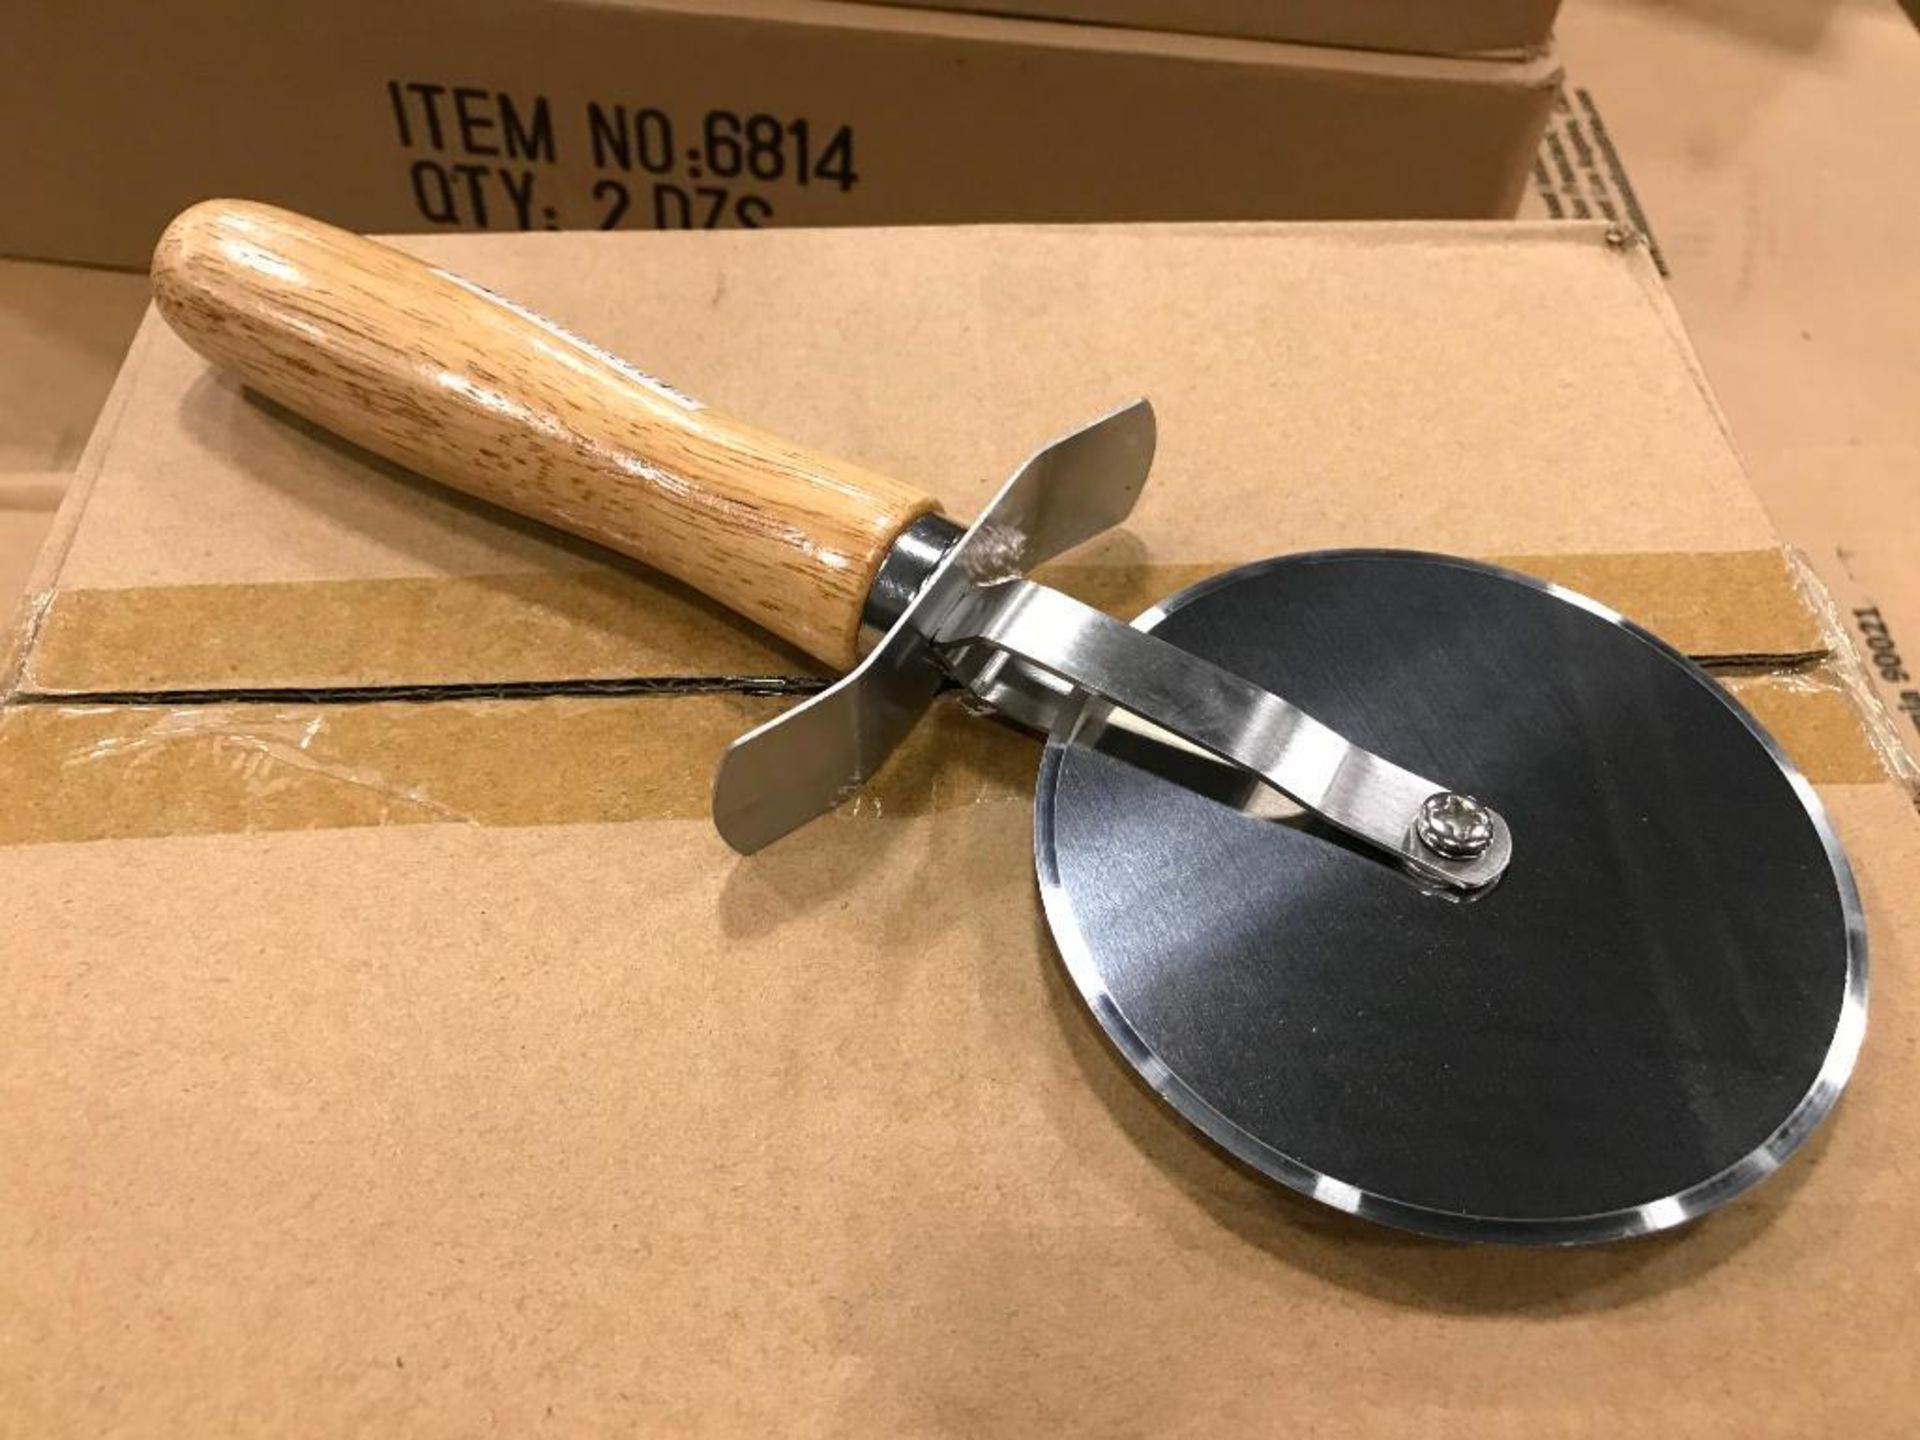 4" PIZZA CUTTER WITH WOODEN HANDLE, JOHNSON ROSE 7400, CASE OF 12 - NEW - Image 2 of 3